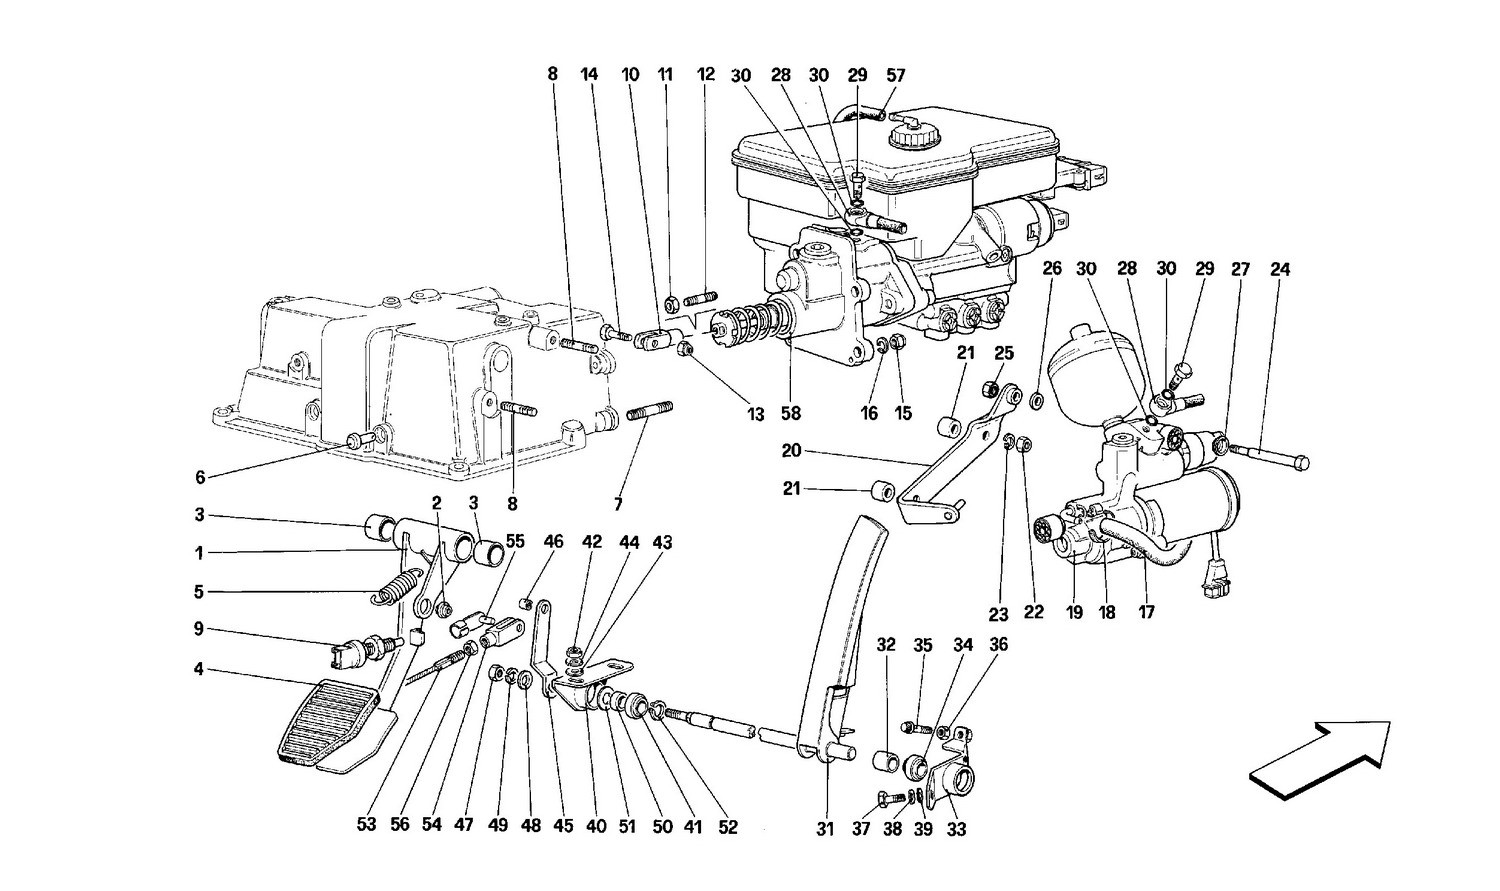 Throttle pedal and brake hydraulic system -Valid for GD-